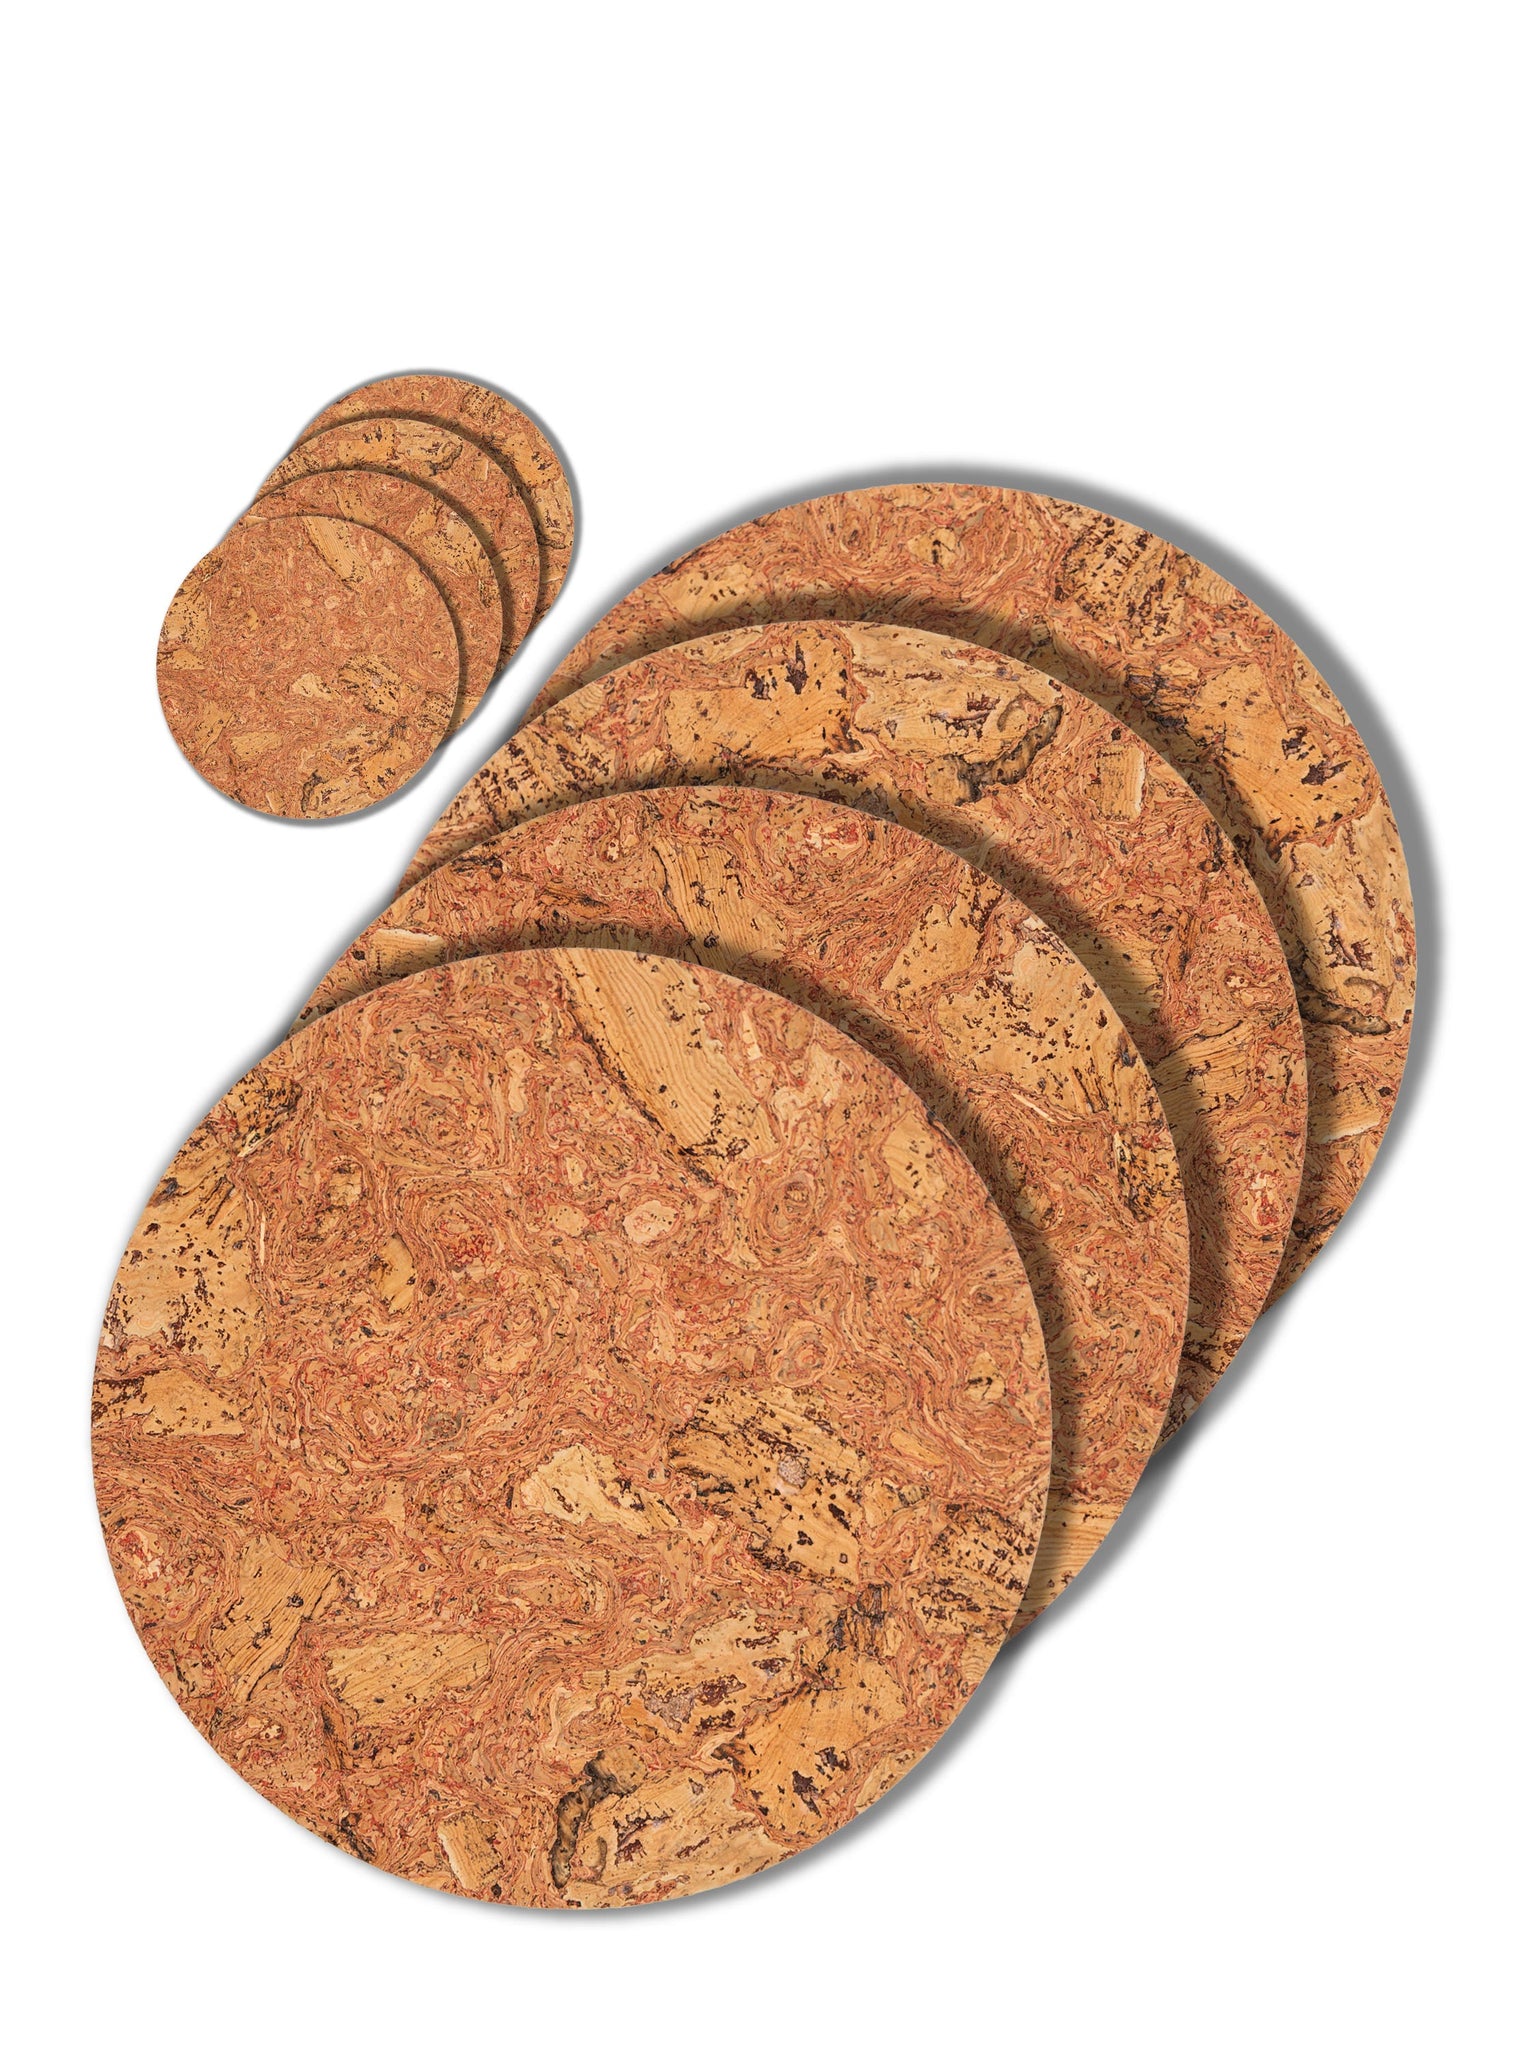 Natural cork coaster and placemat set in red